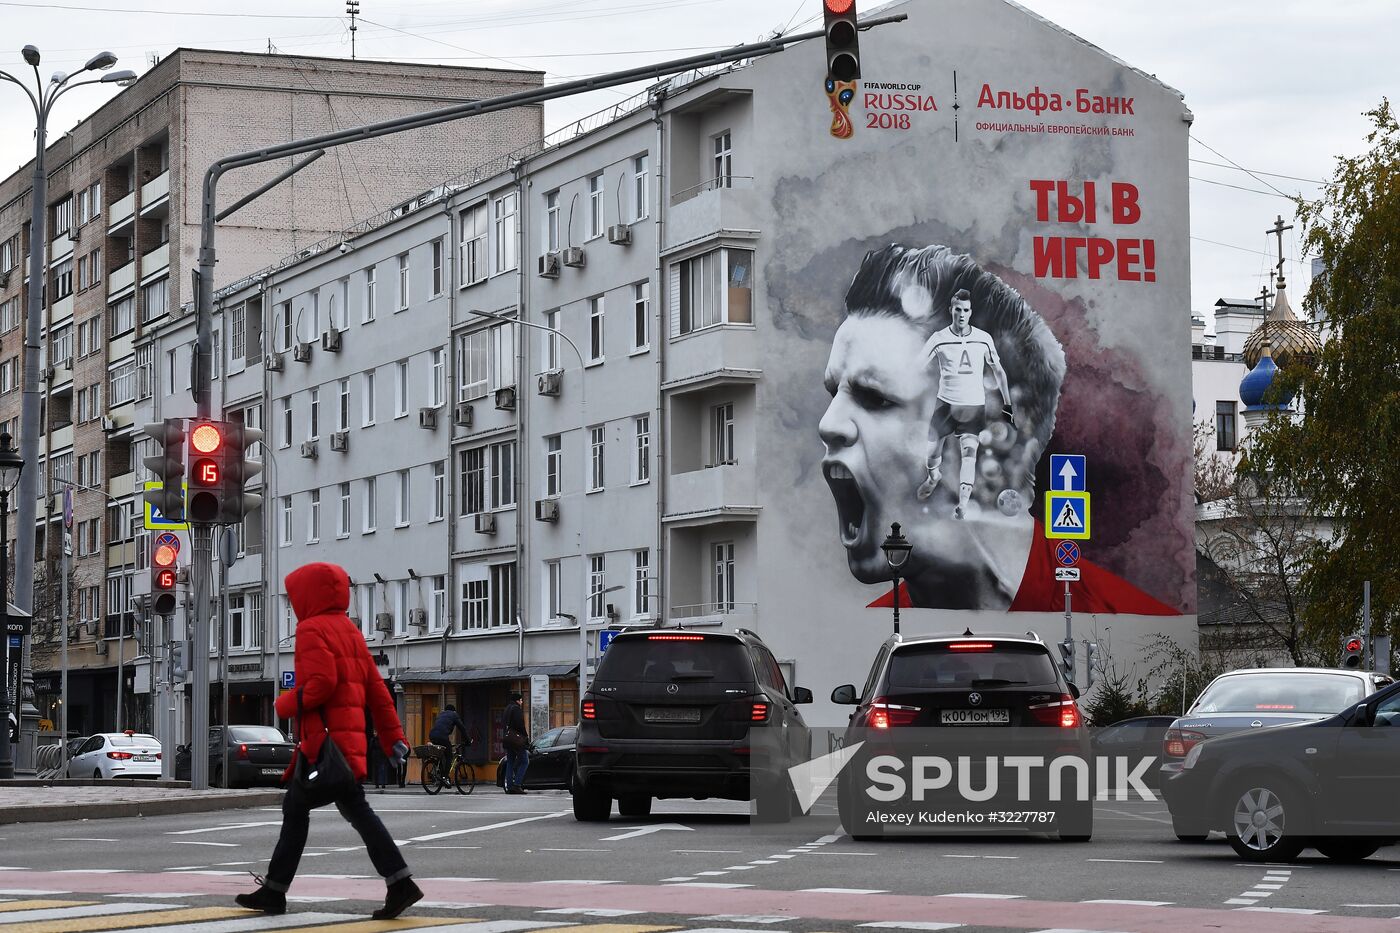 2018 FIFA World Cup graffiti in Moscow